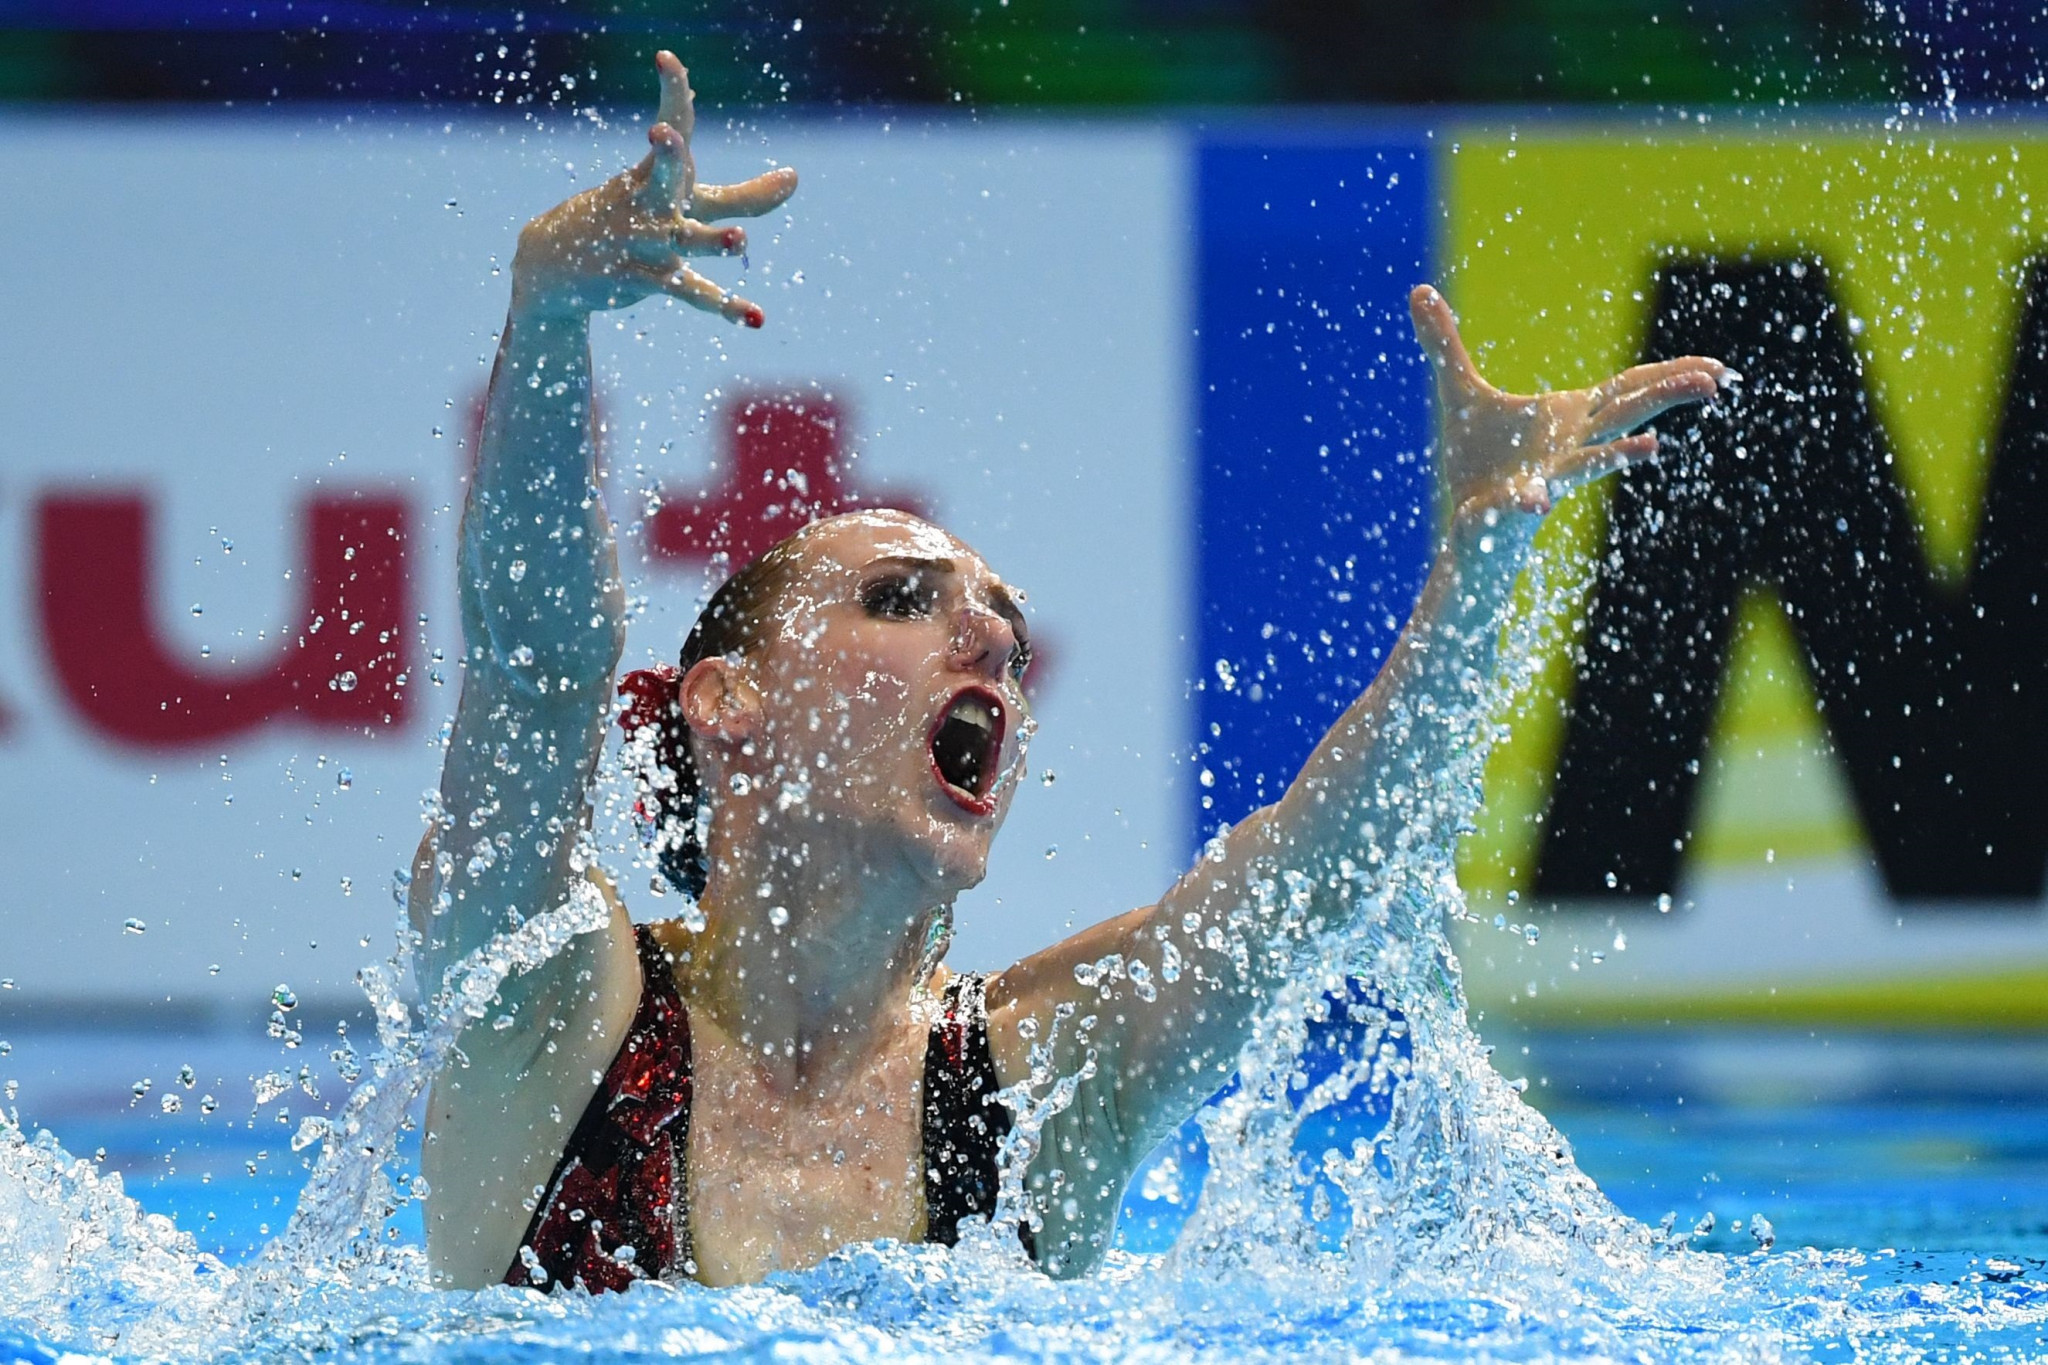 Russia's Svetlana Romashina retires as the most decorated artistic swimmer in Olympic history ©Getty Images